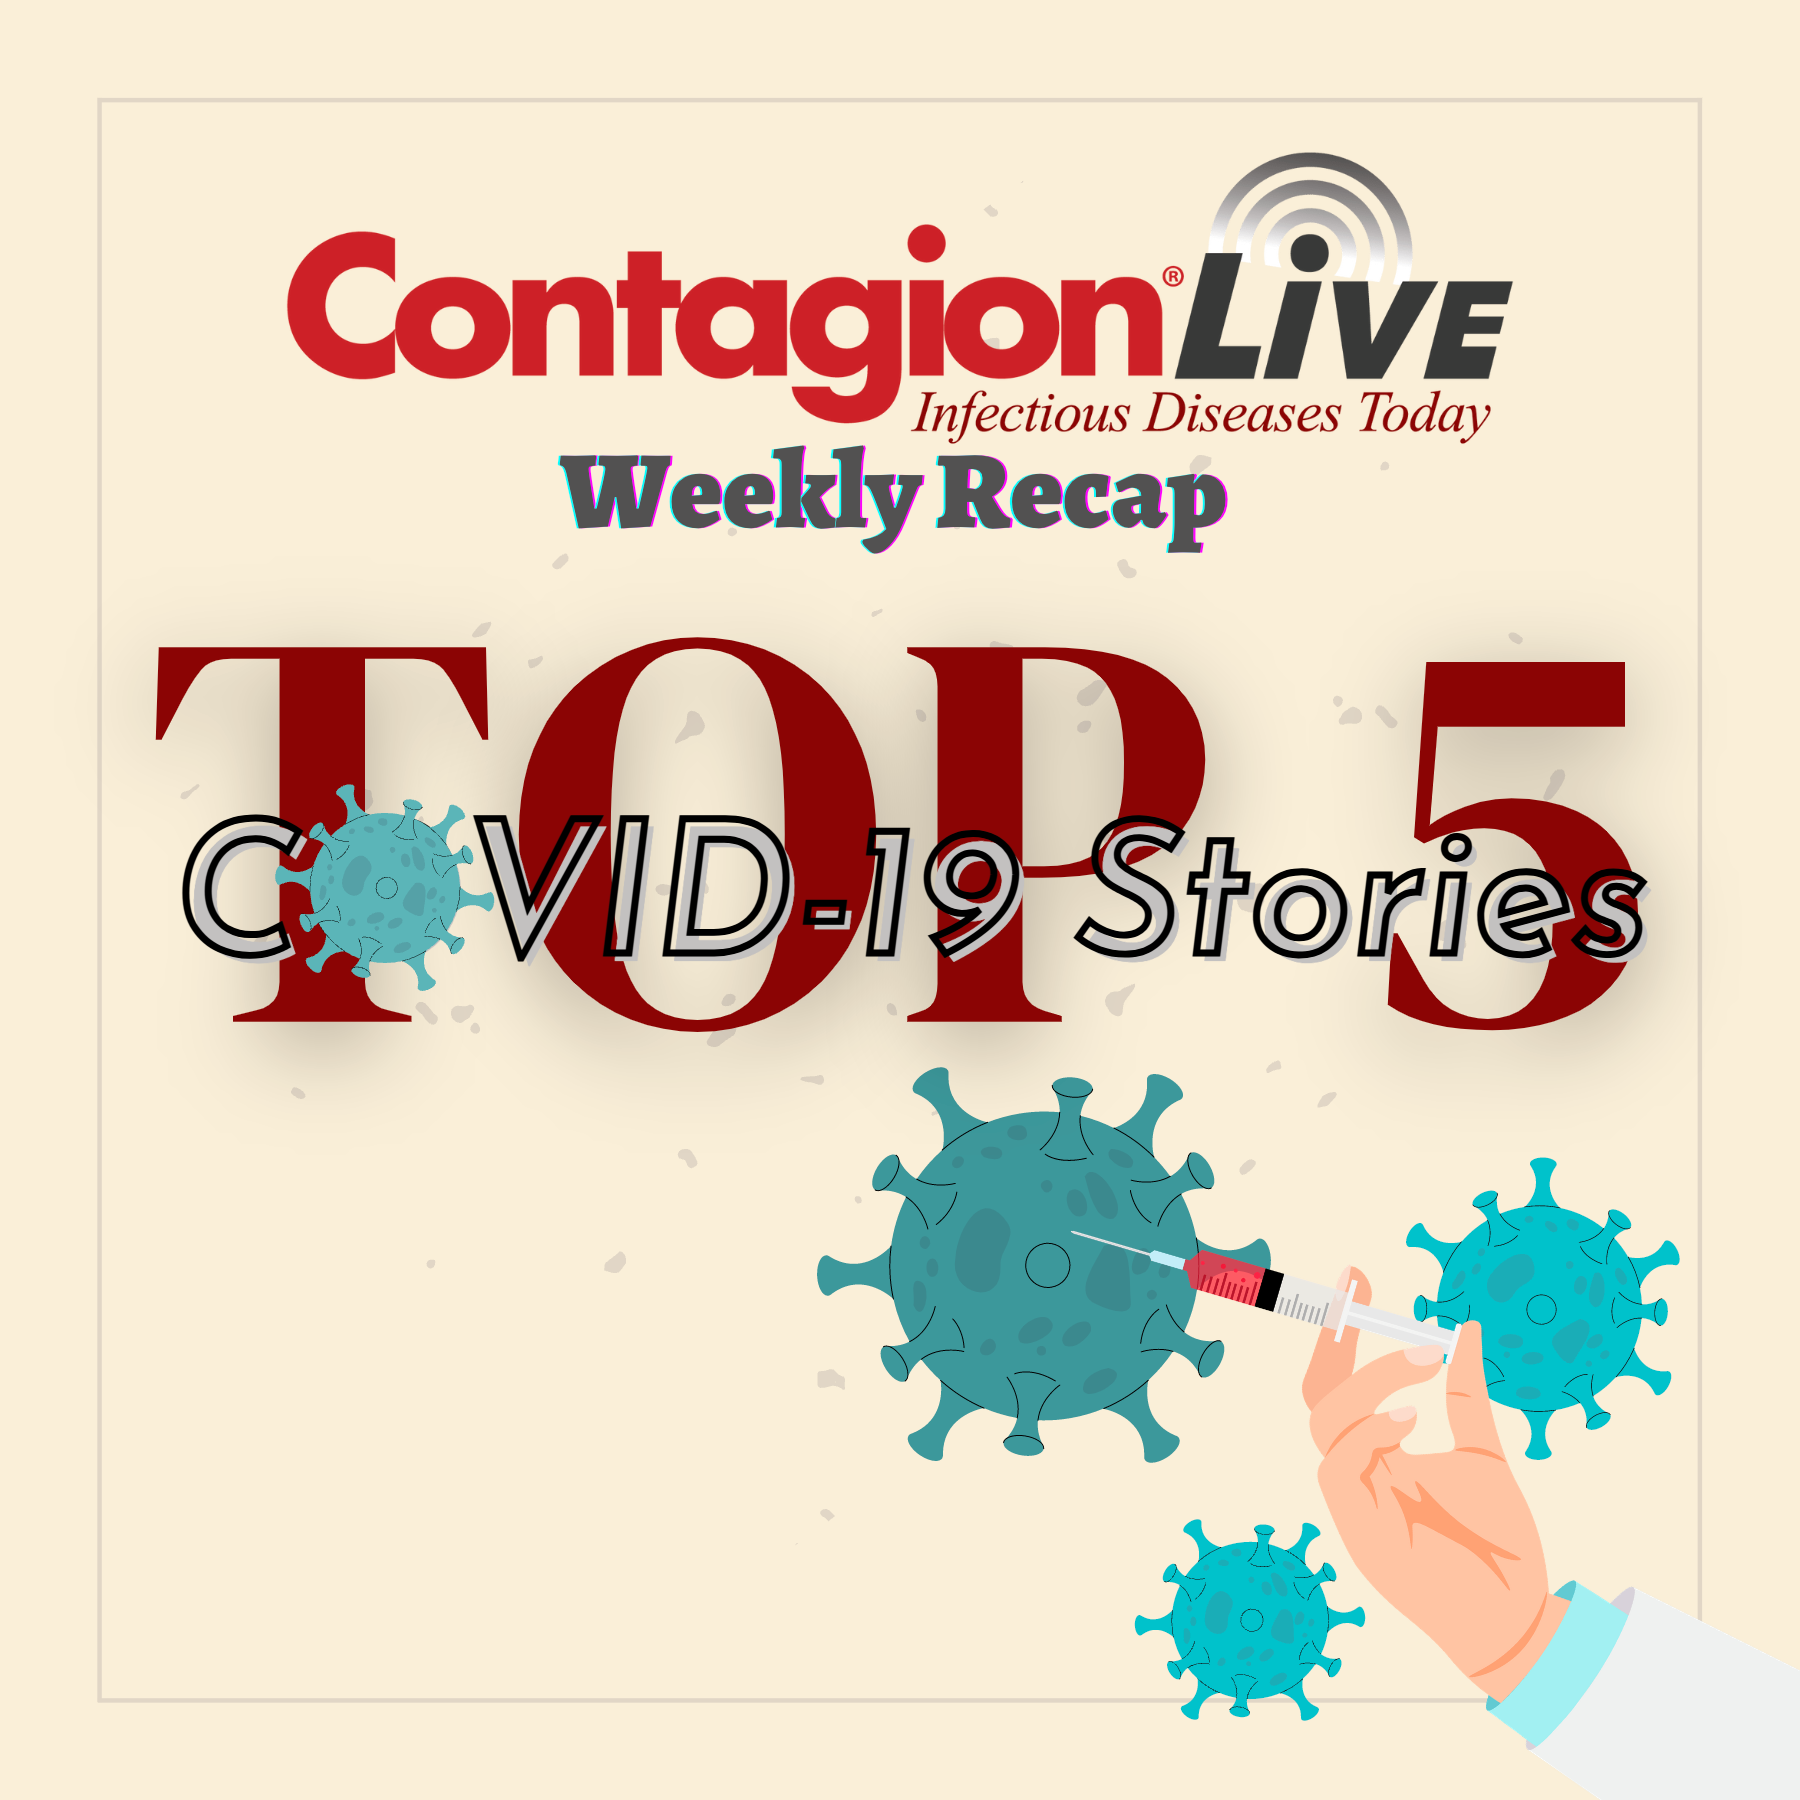 The biggest COVID-19 news from the past week.